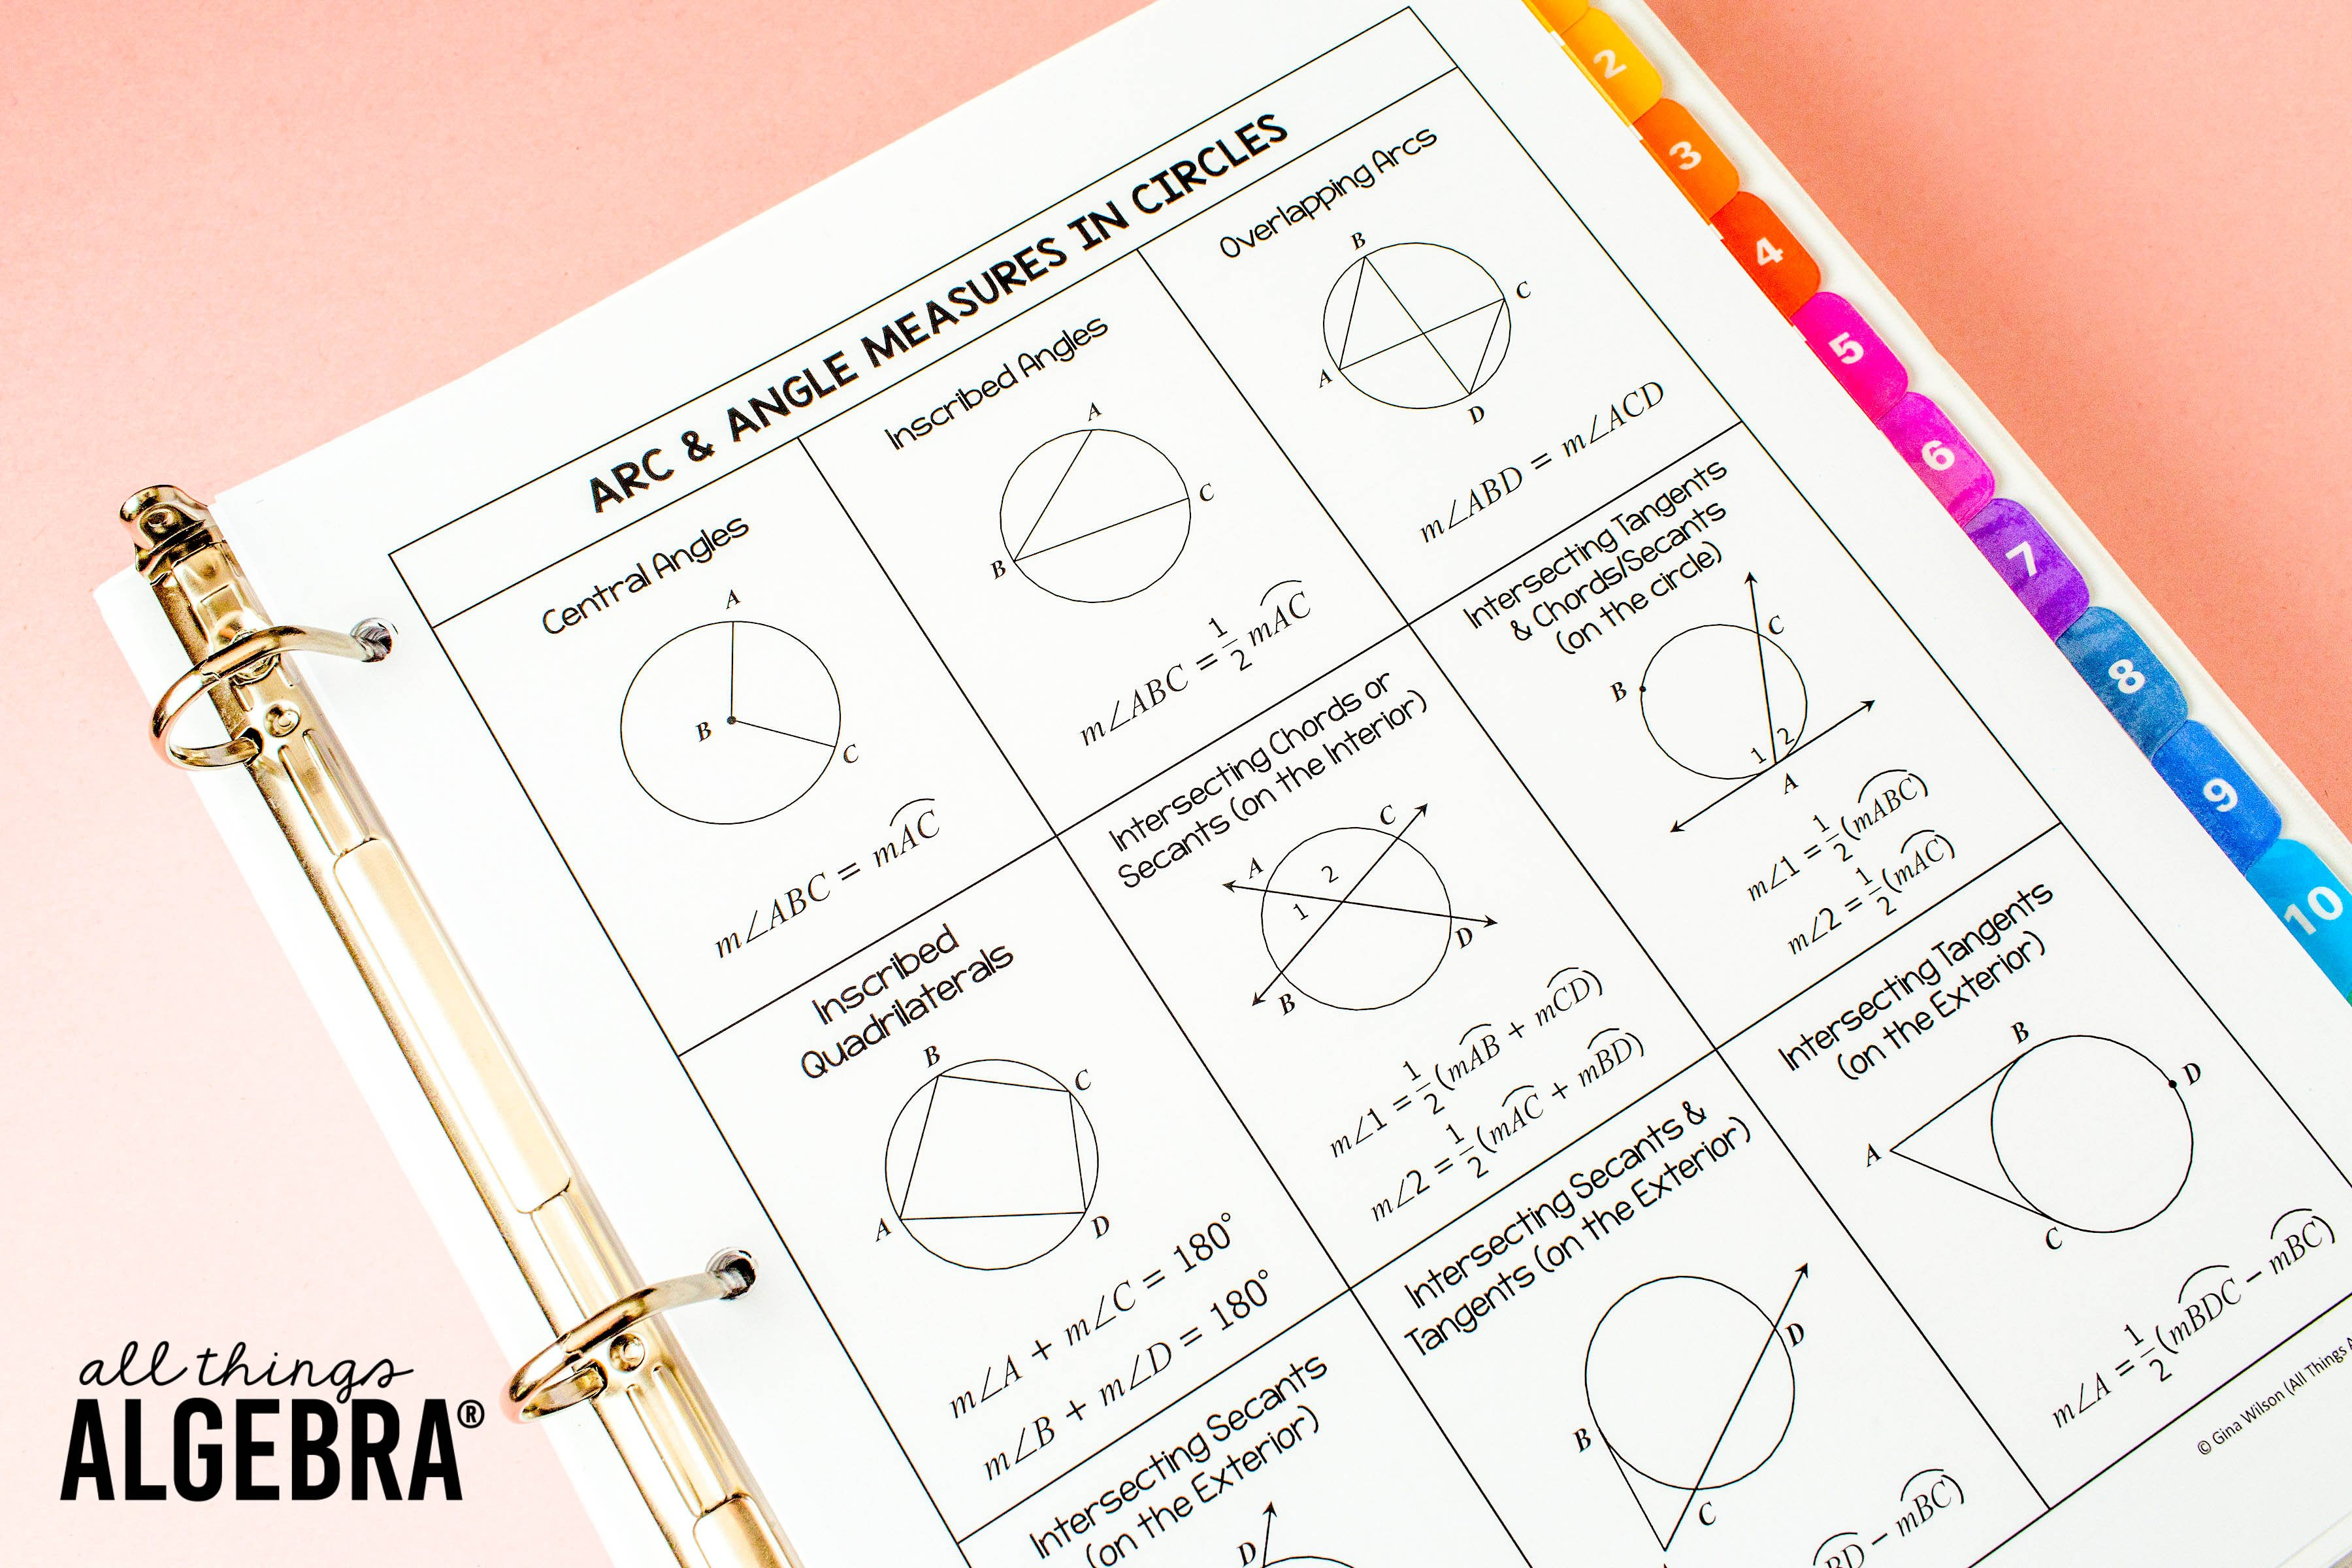 Arcs Angles And Algebra Worksheet Answers Gina Wilson In Central Angles And Arc Measures Worksheet Answers Gina Wilson